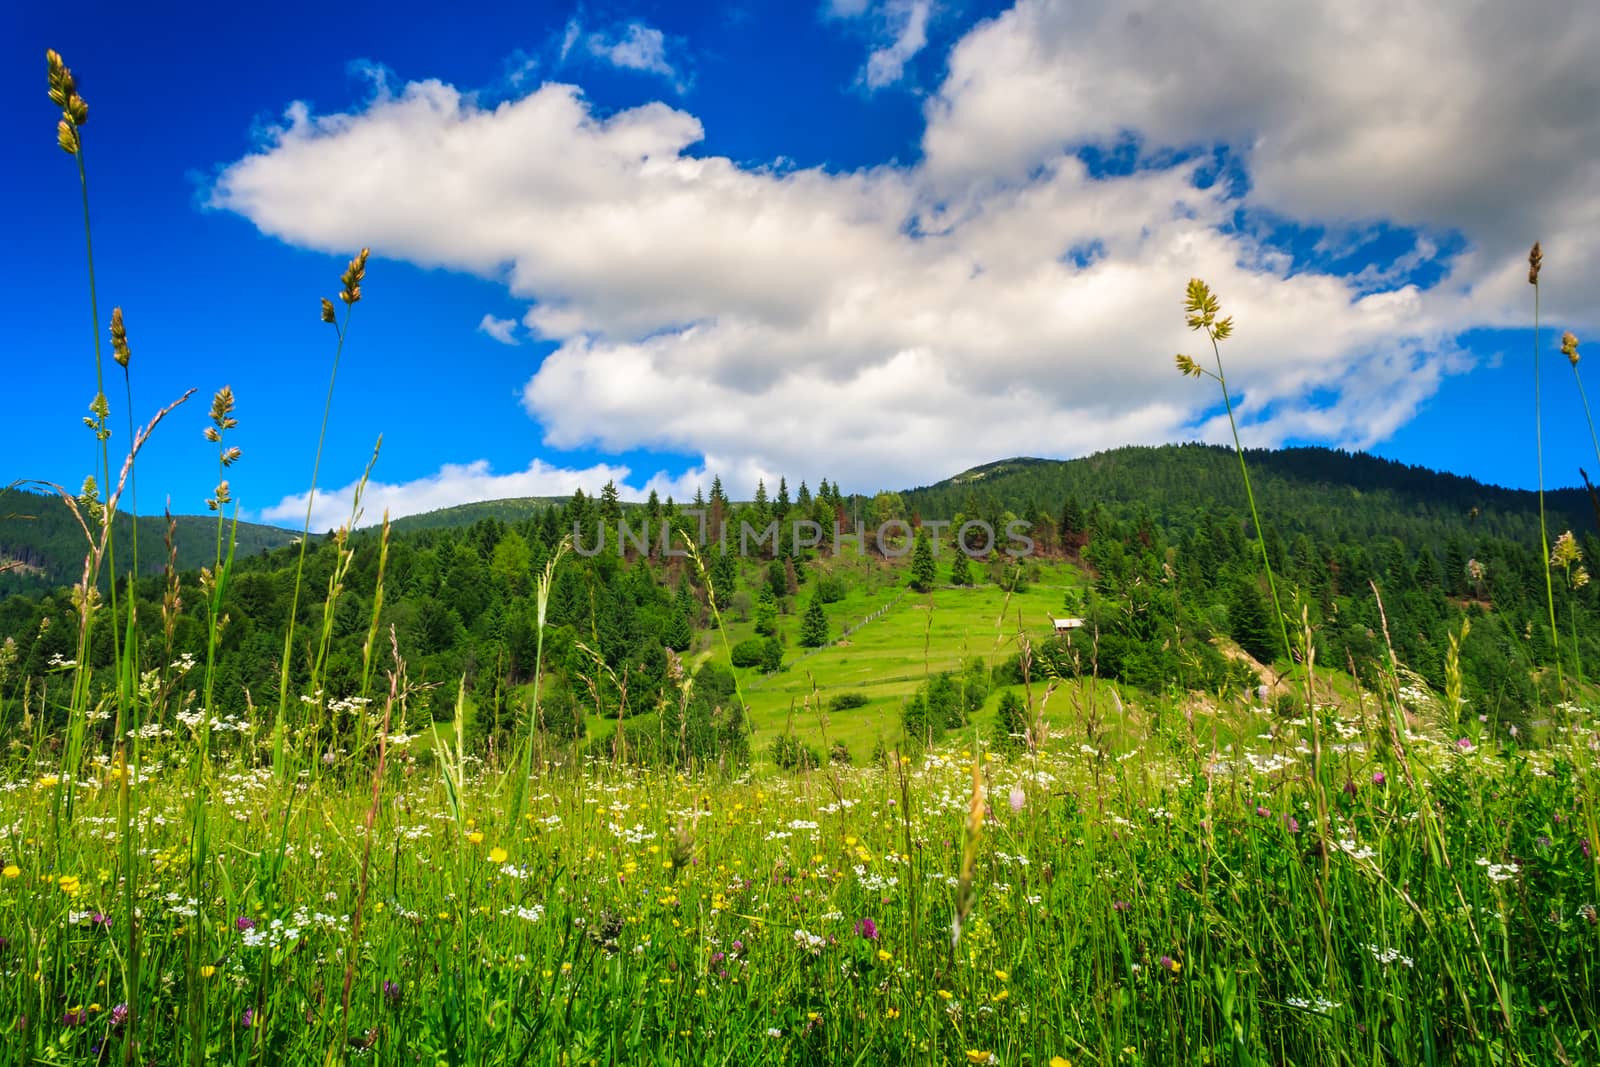 Alpine meadow with tall grass on a background of mountains